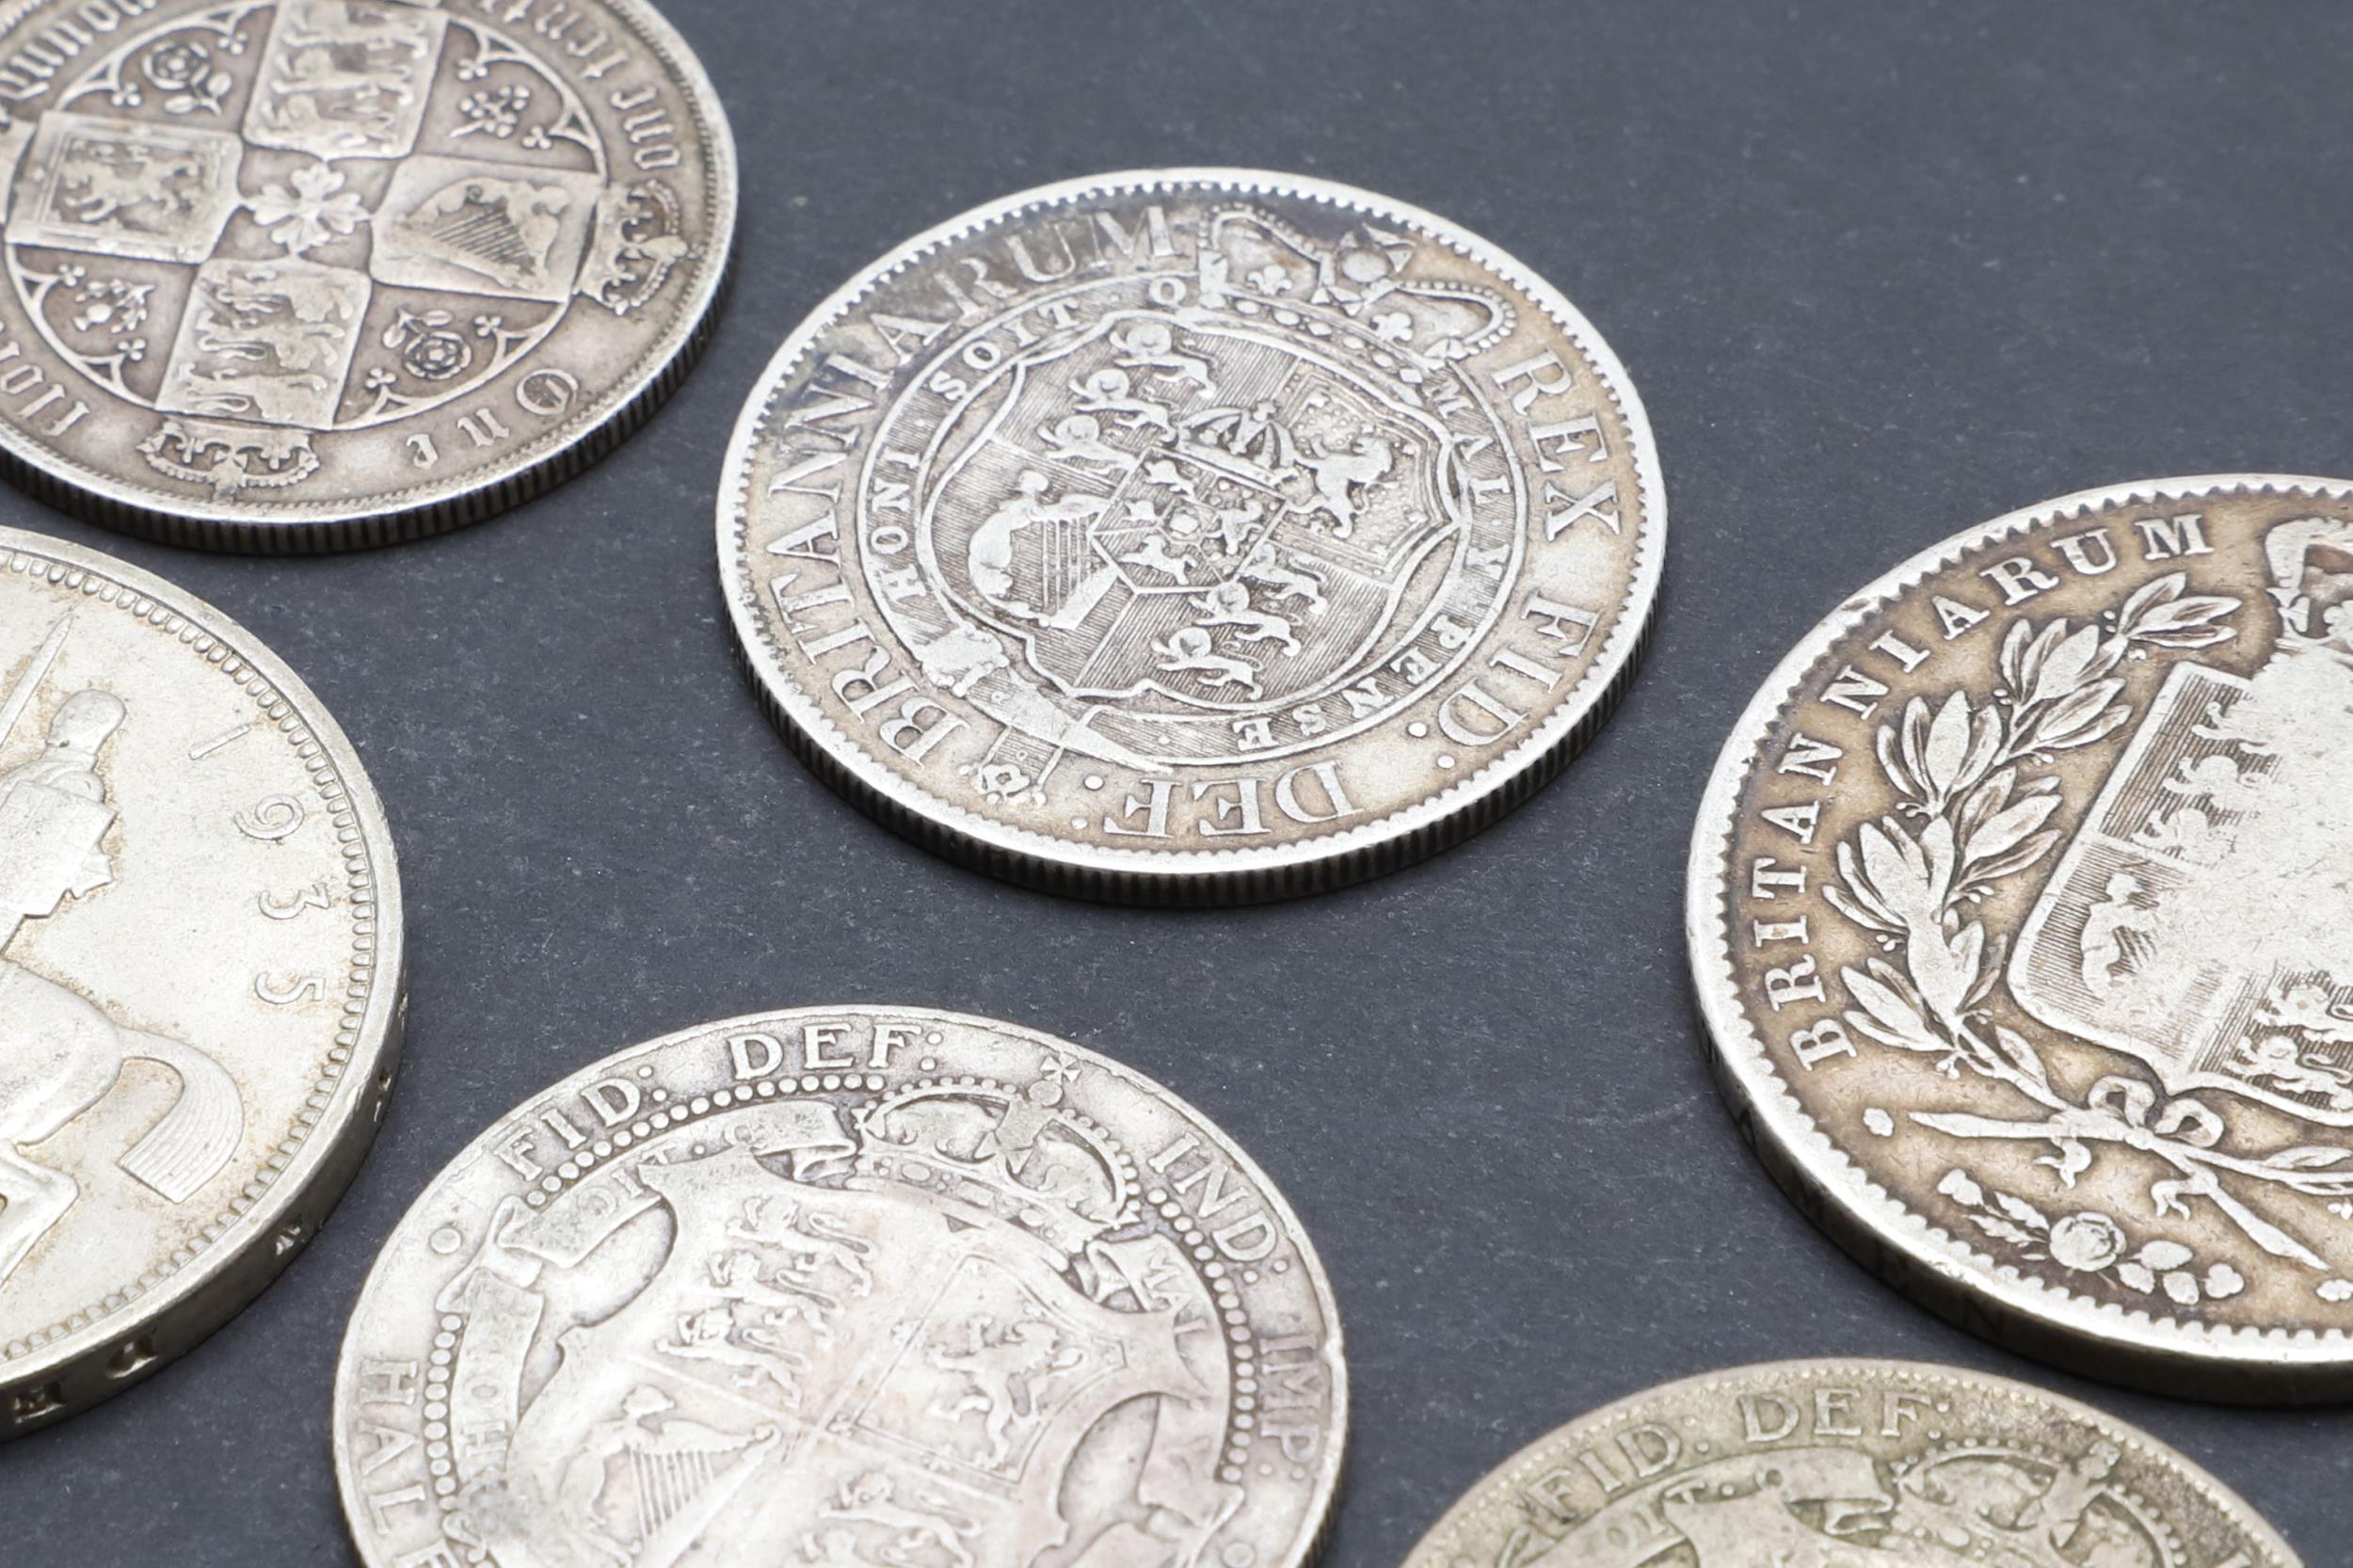 A GEORGE III HALF CROWN 1817, QUEEN VICTORIA CROWN, 1845 AND OTHERS. - Image 3 of 3